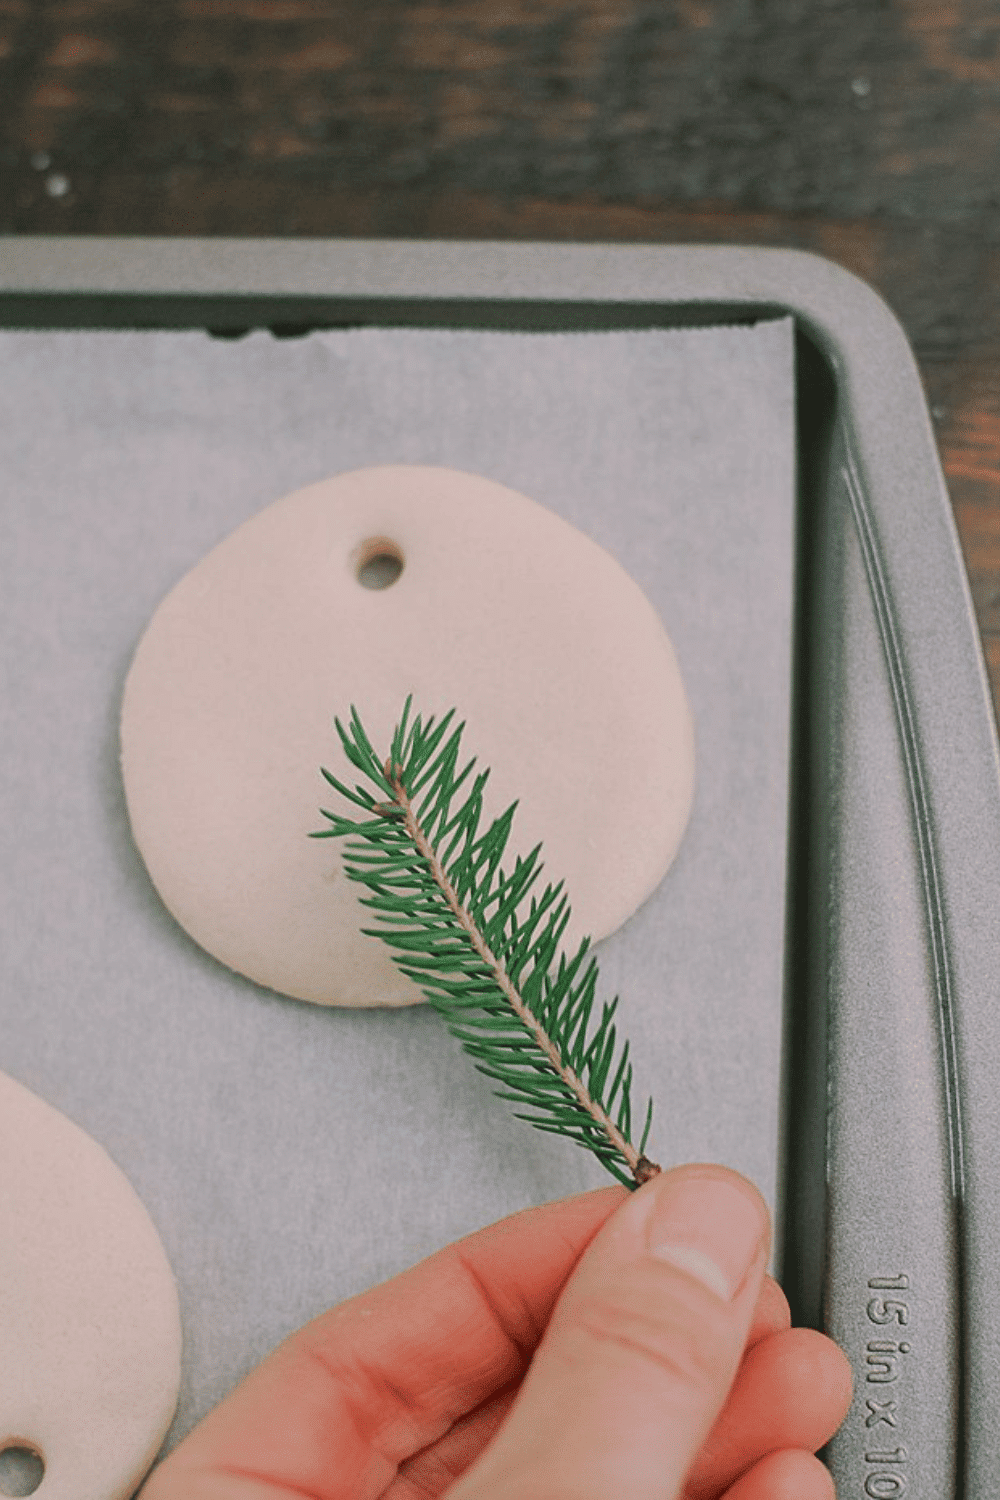 How to Make a Salt Dough Ornament with Pine Needle Embellishment